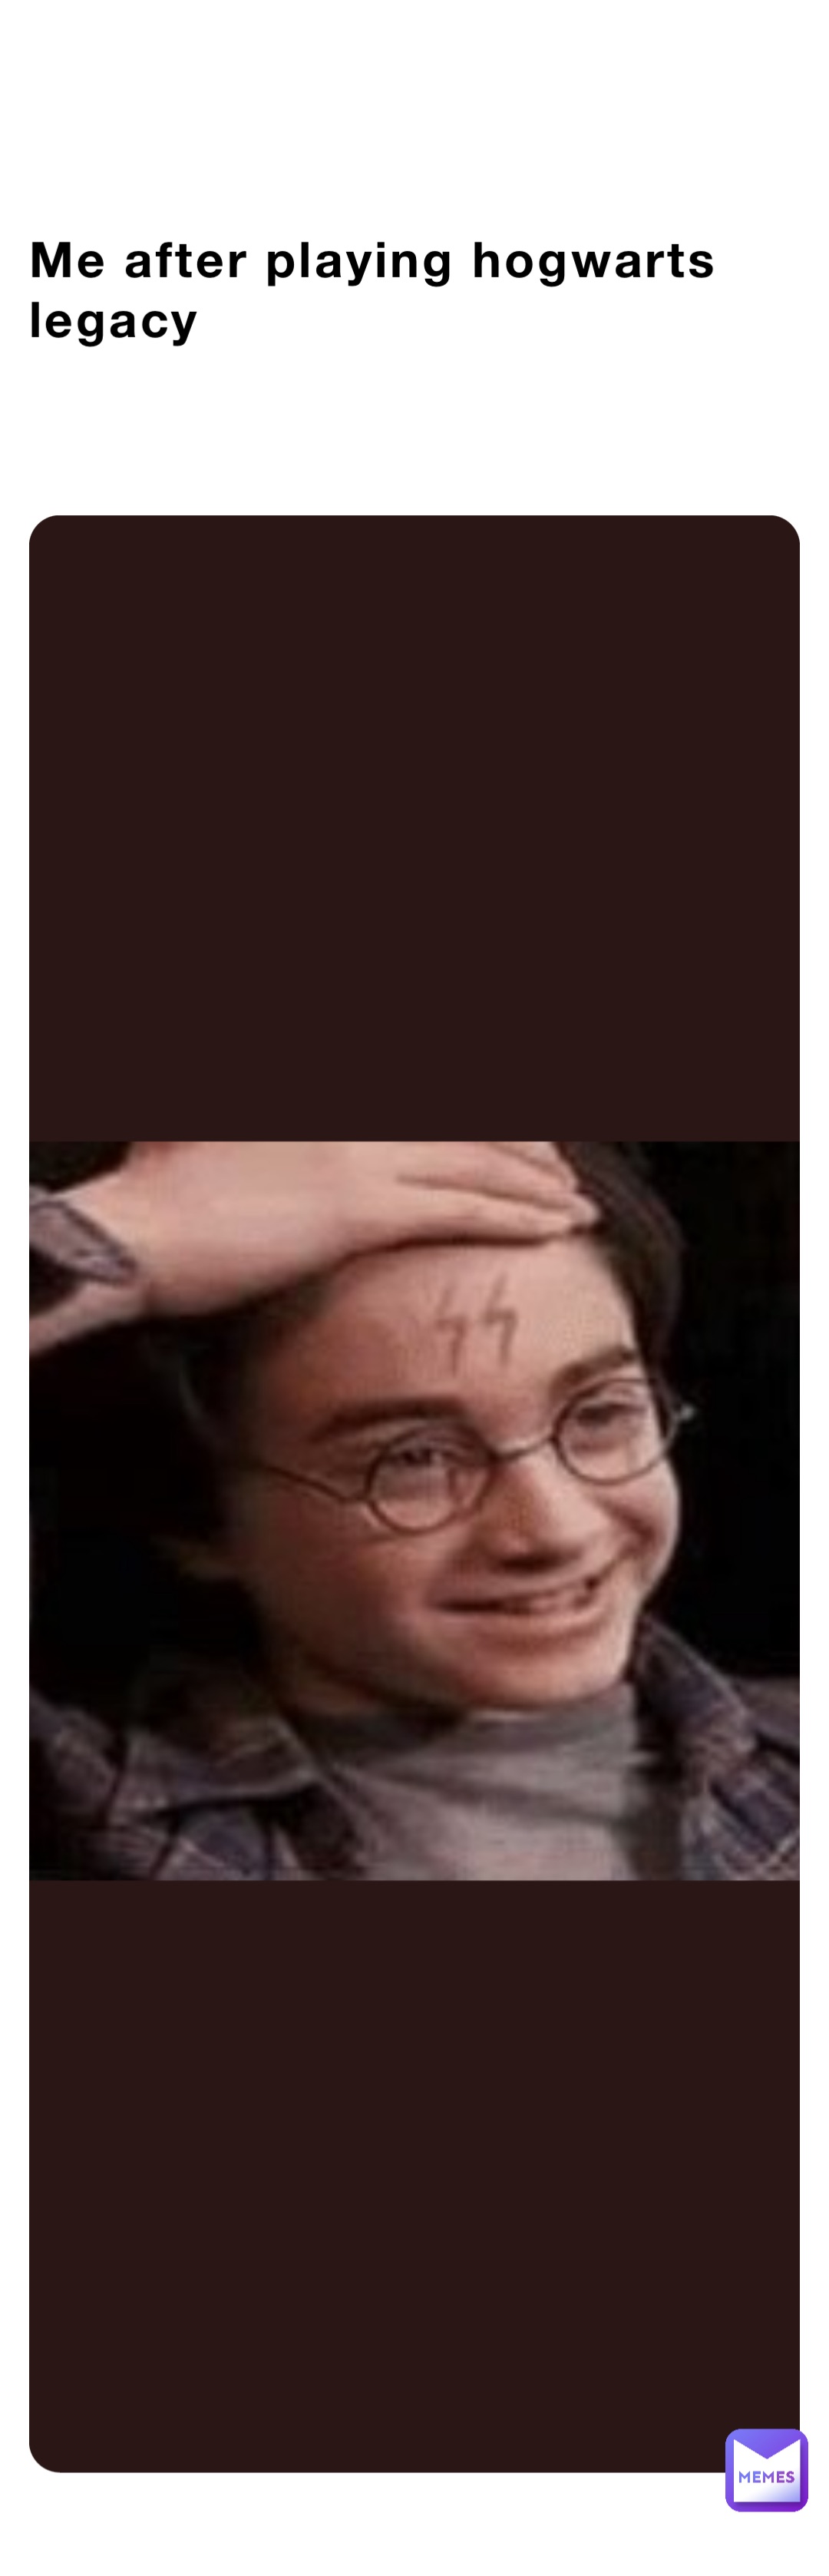 Me after playing hogwarts legacy